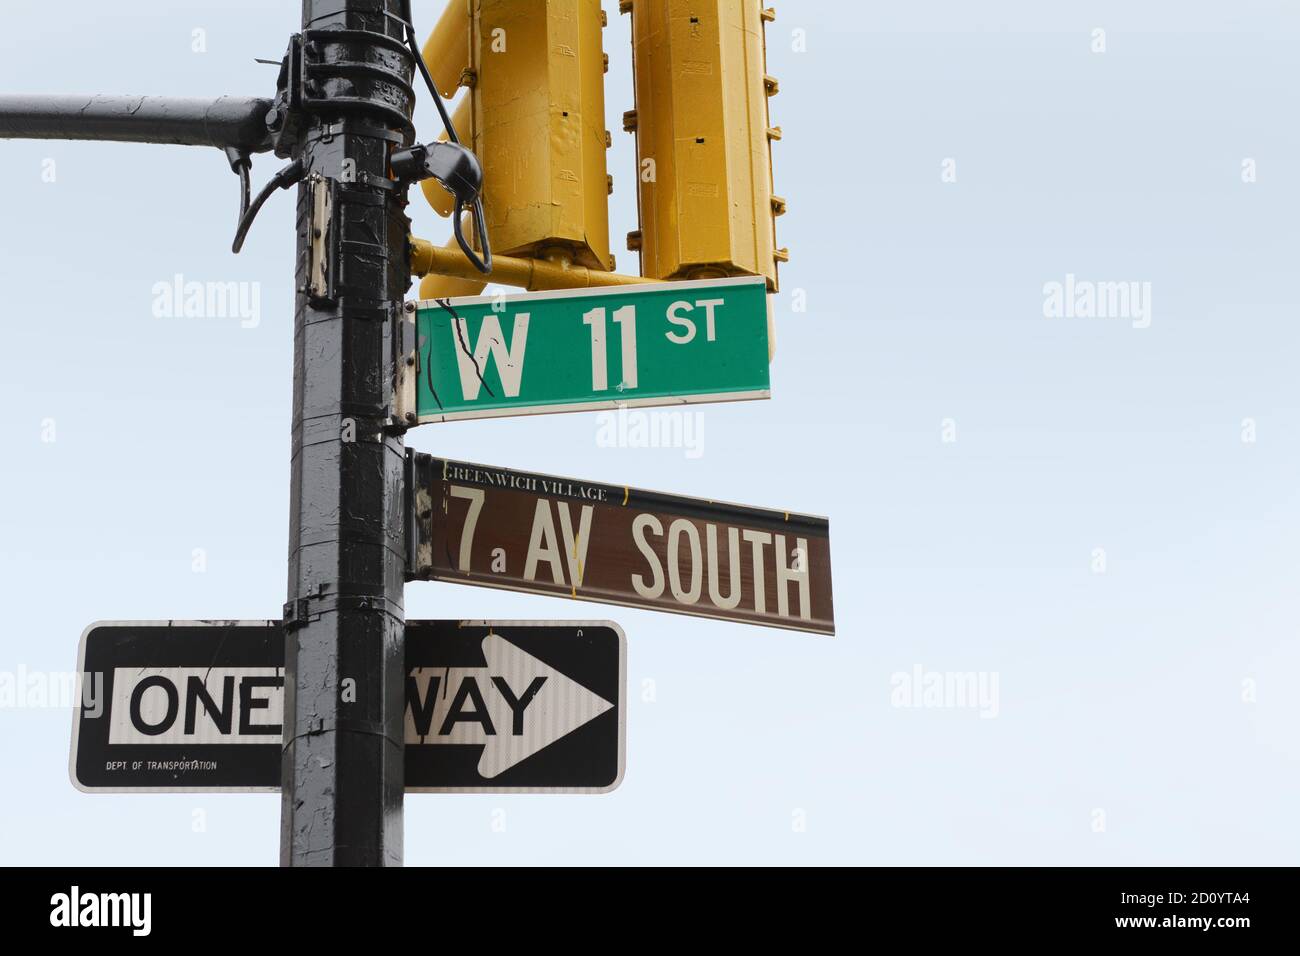 Street signs on the corner of 7th Ave South and West 11th Street in Greenwich Village, New York City; copy space on blue sky Stock Photo